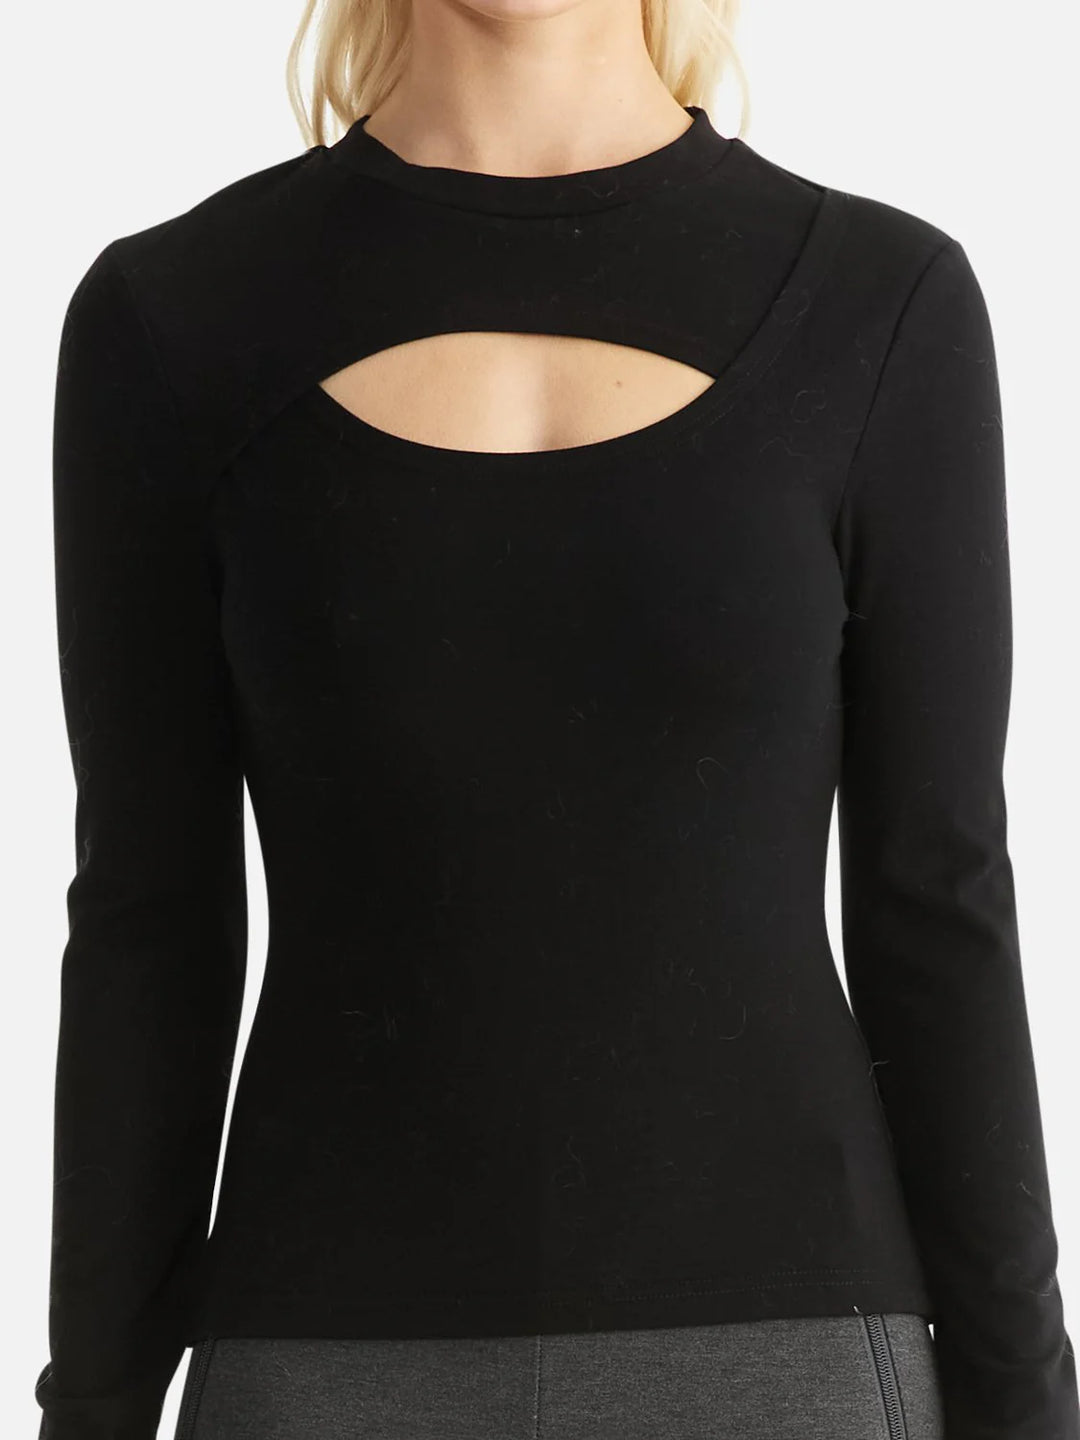 Ena Pelly Remi Ribbed Top - Black